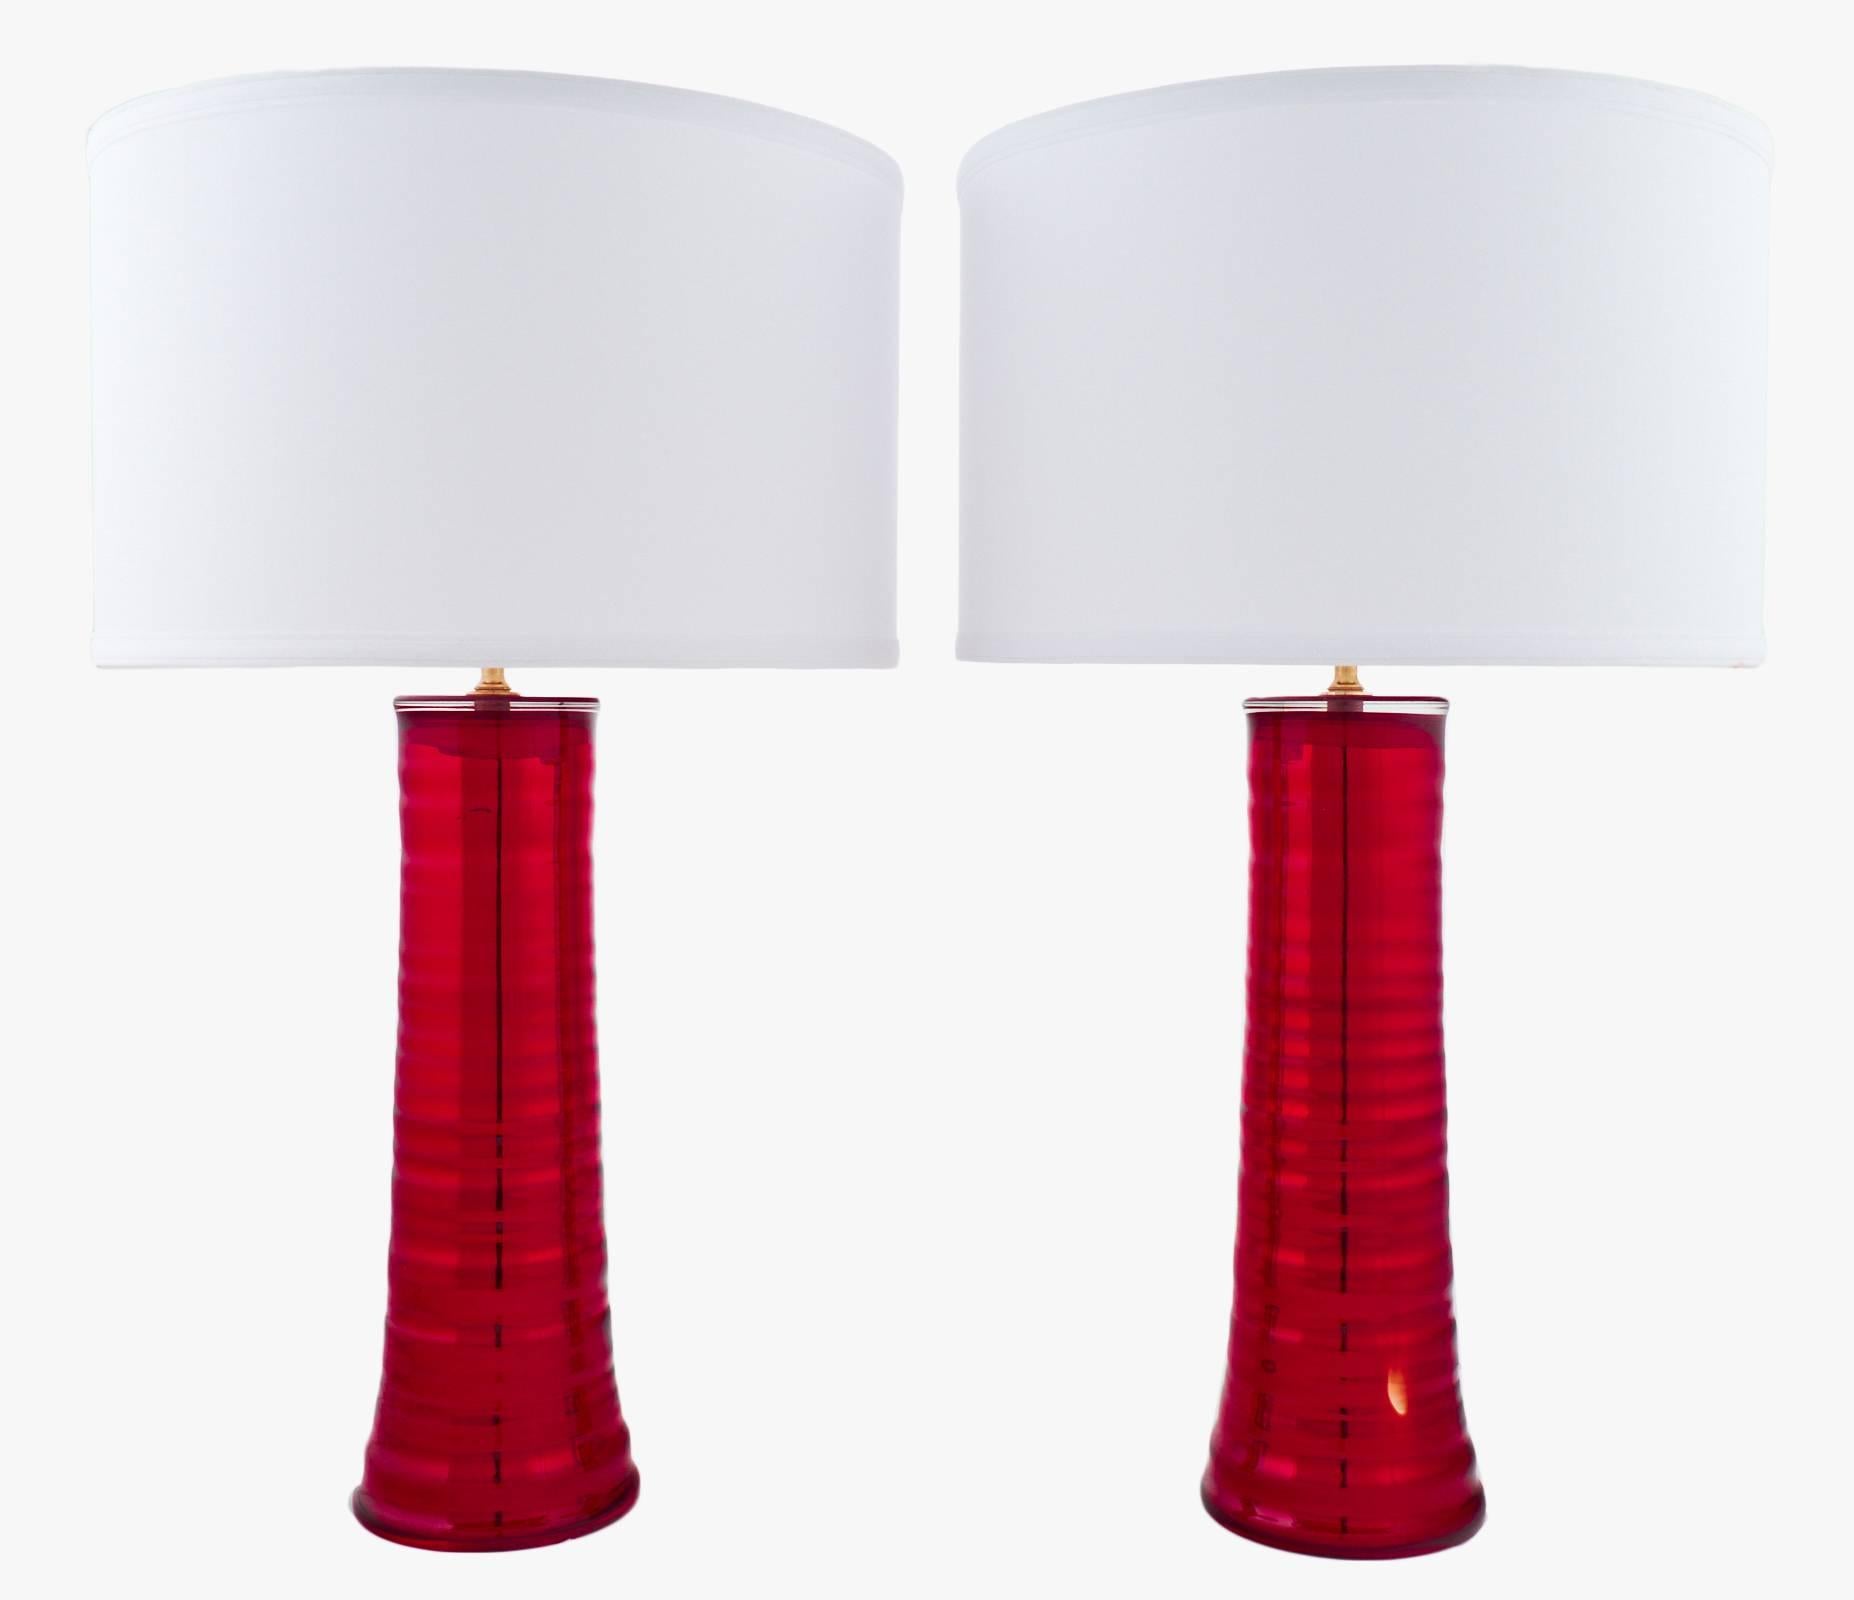 Italian Murano glass pair of lamps in a cherry red mirrored glass. A slightly rippled texture adds even more depth to the thick, high-quality Murano glass. The height of the glass is 16.75 inches. This fabulous pair of lights has been rewired for